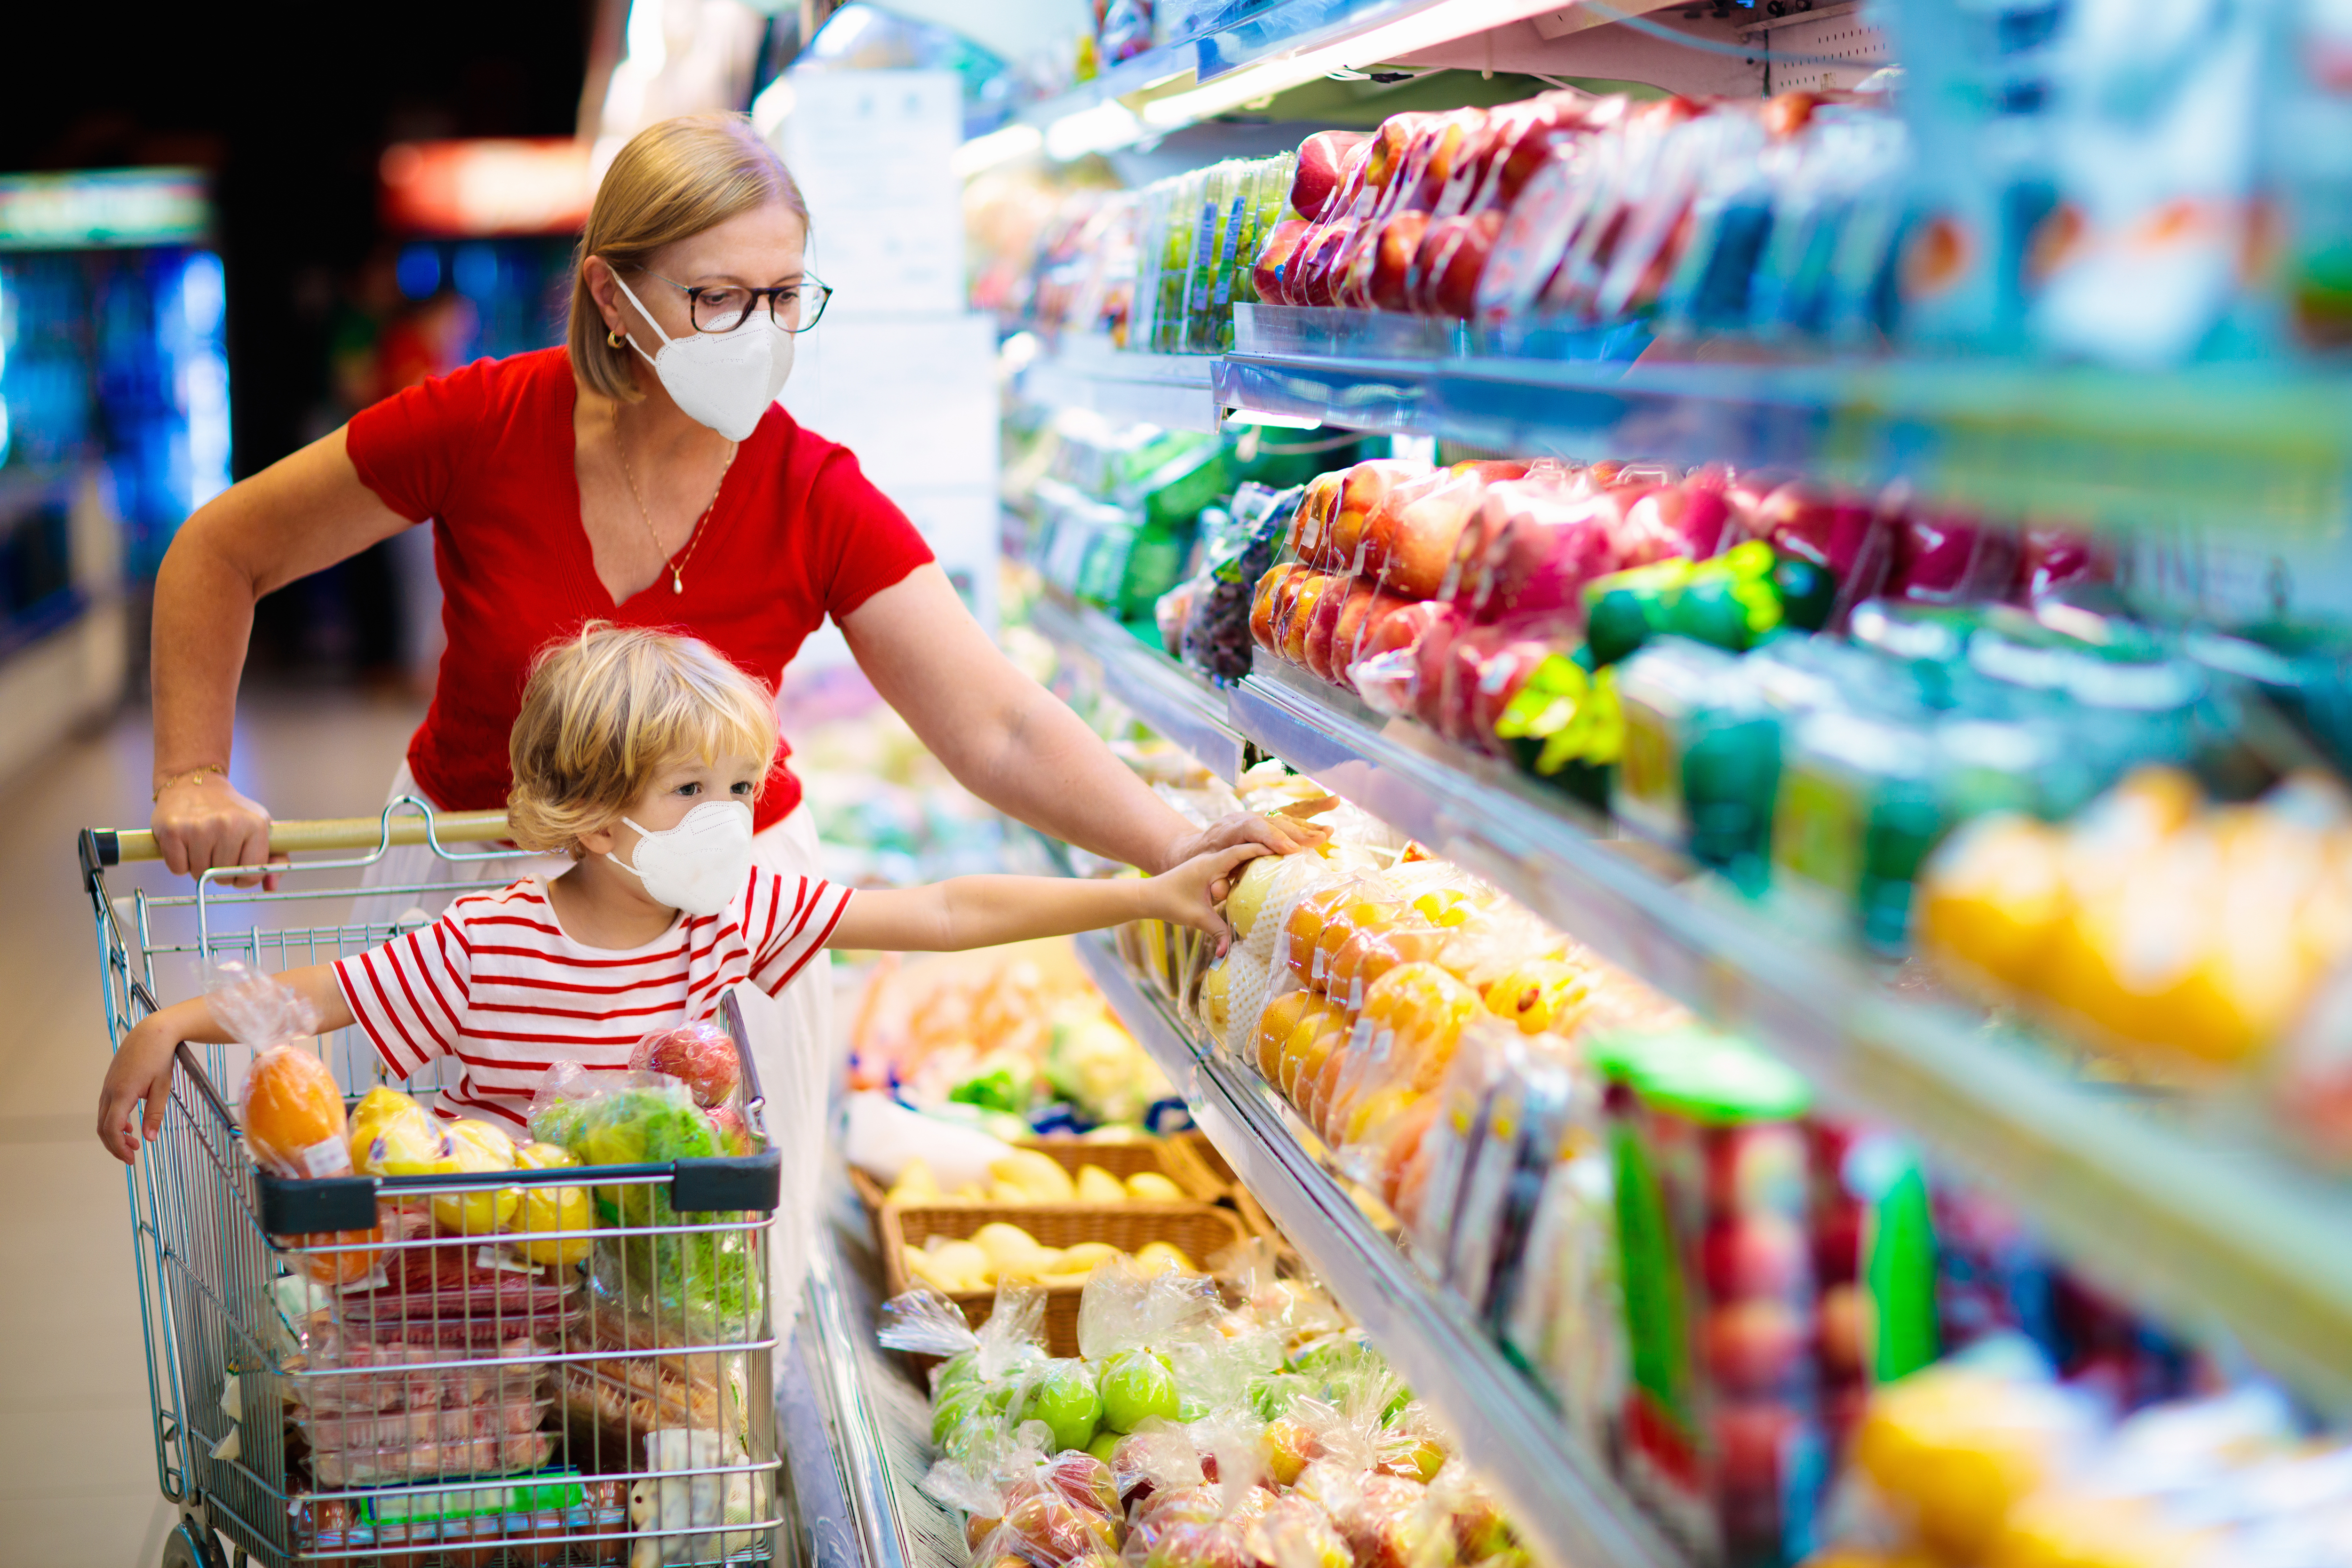 Mother and son wearing face masks while shopping in a superstore | Source: Shutterstock